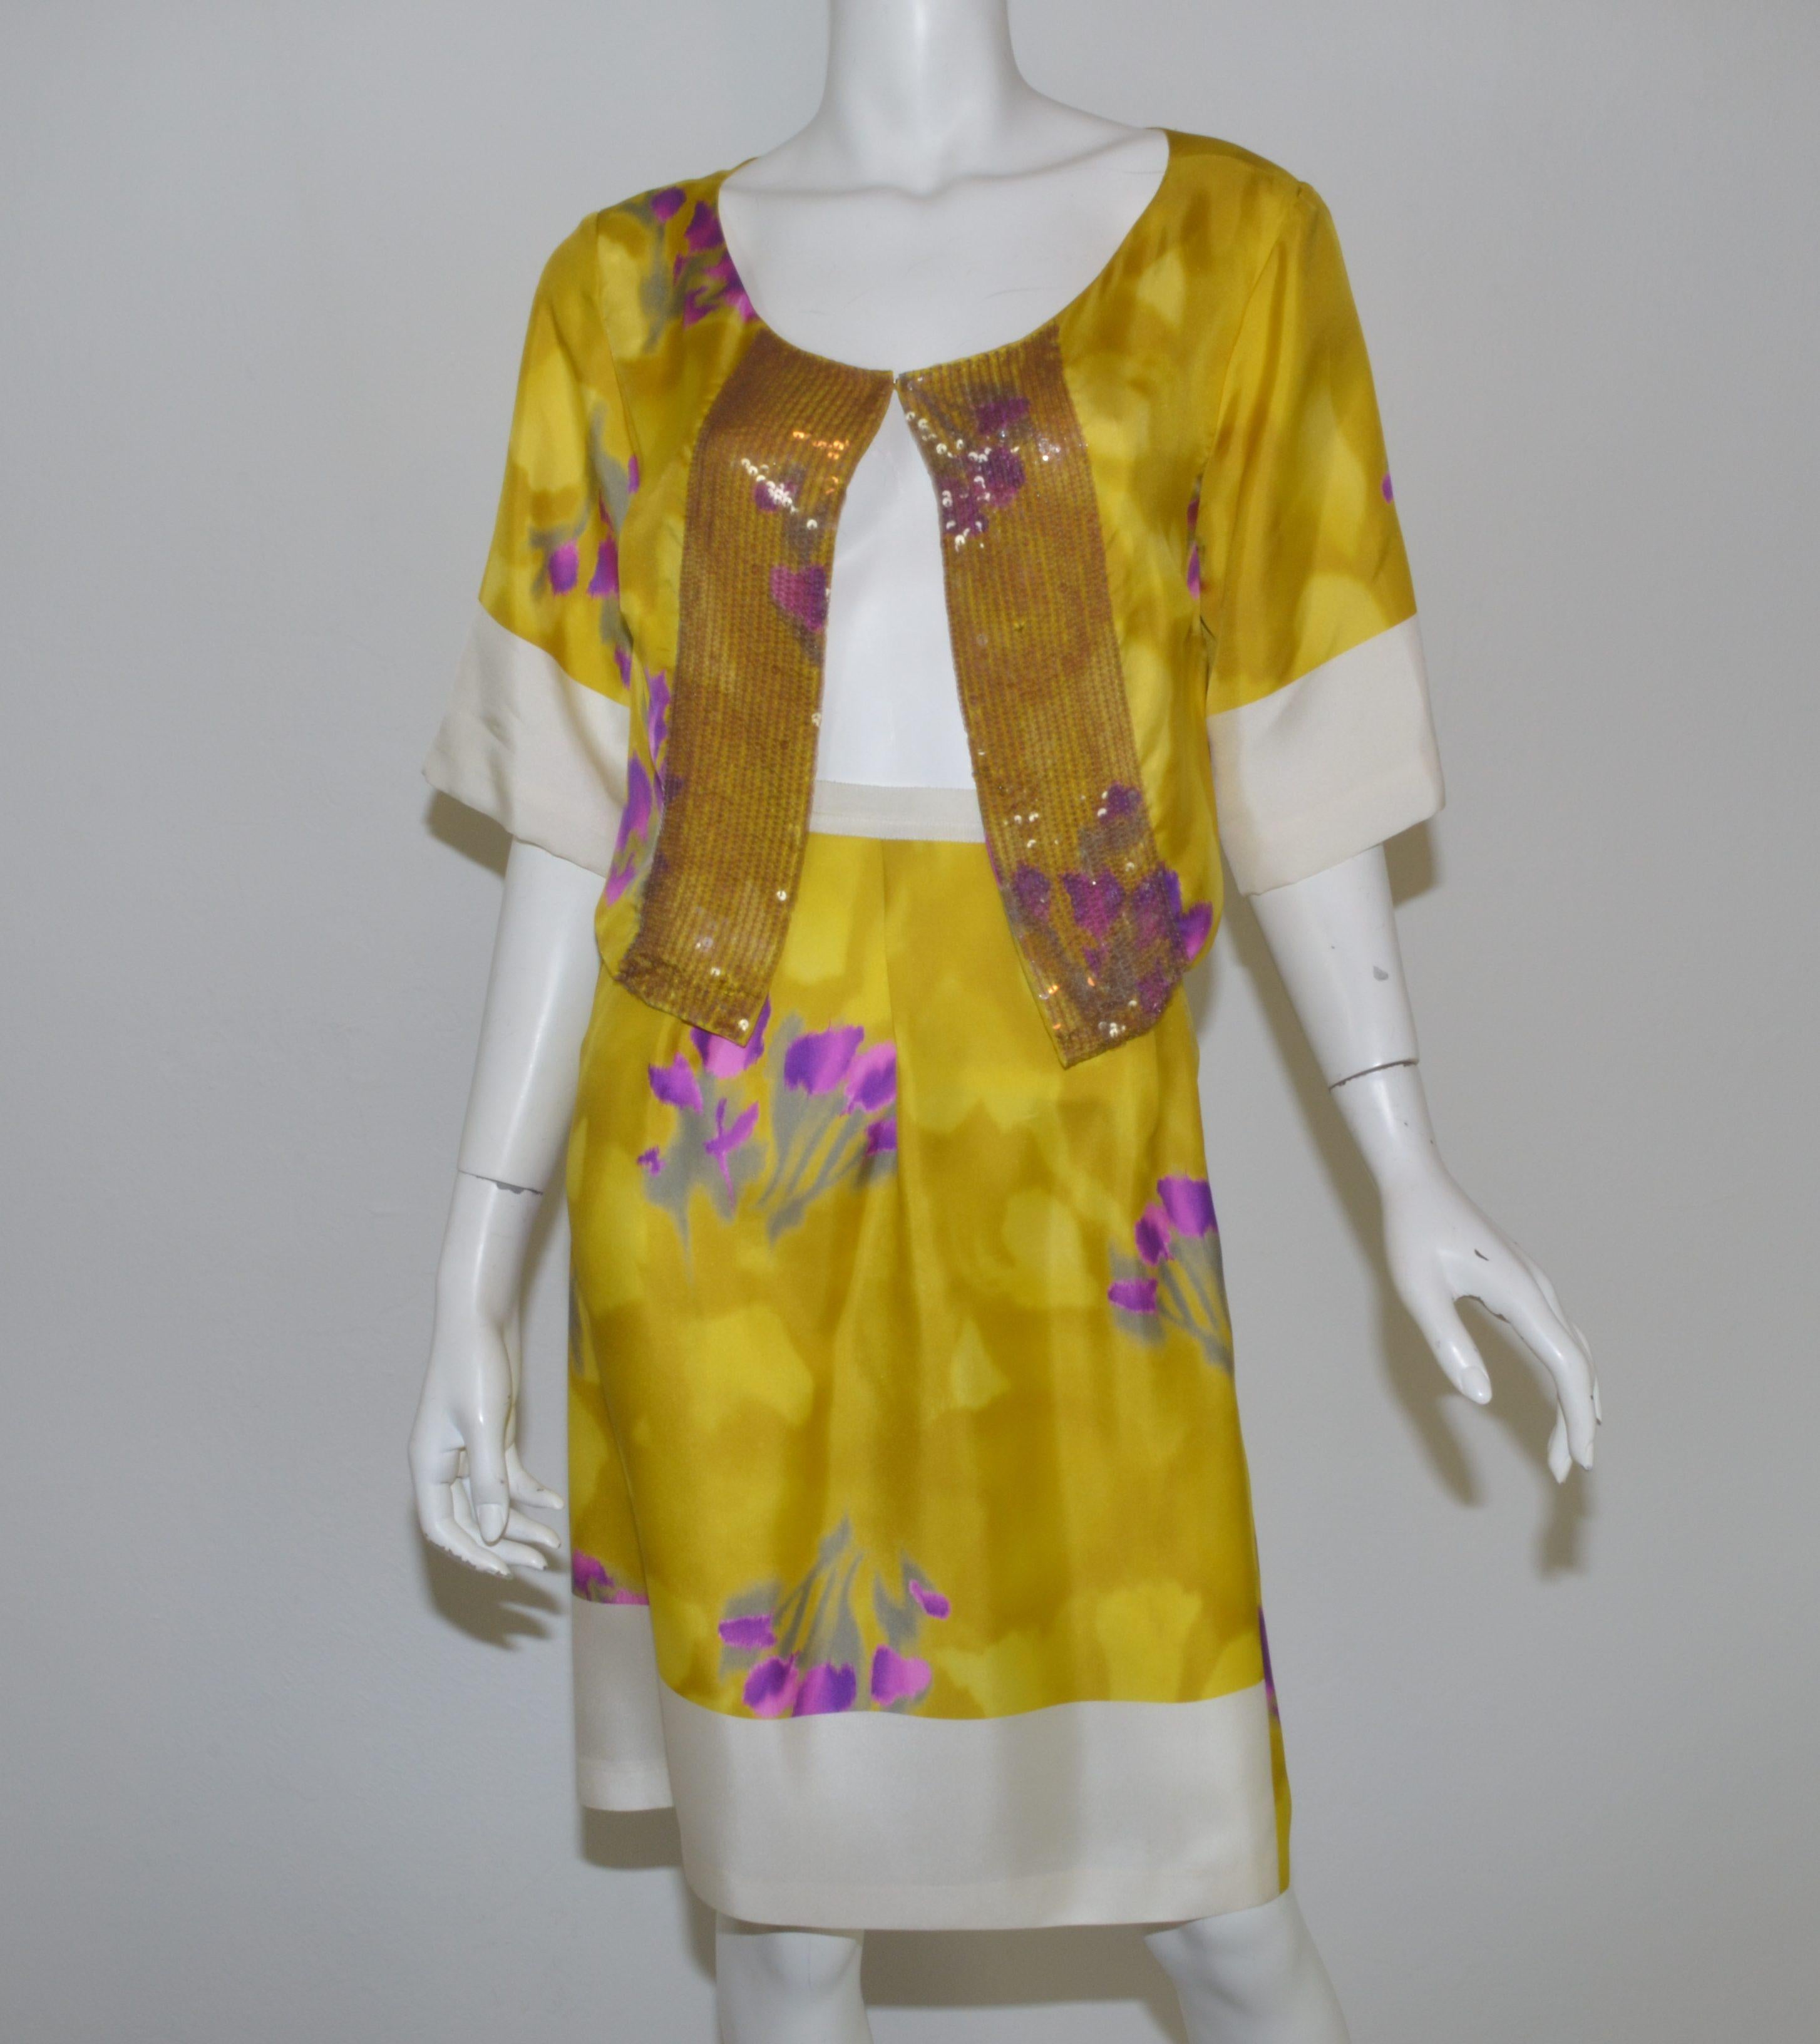 Dries Van Noten skirt set is featured in beautiful yellow and purple silk with a floral print throughout the fabric. Top has a single hook and eye closure with sequin embellishing along the opening. 100% silk, in excellent